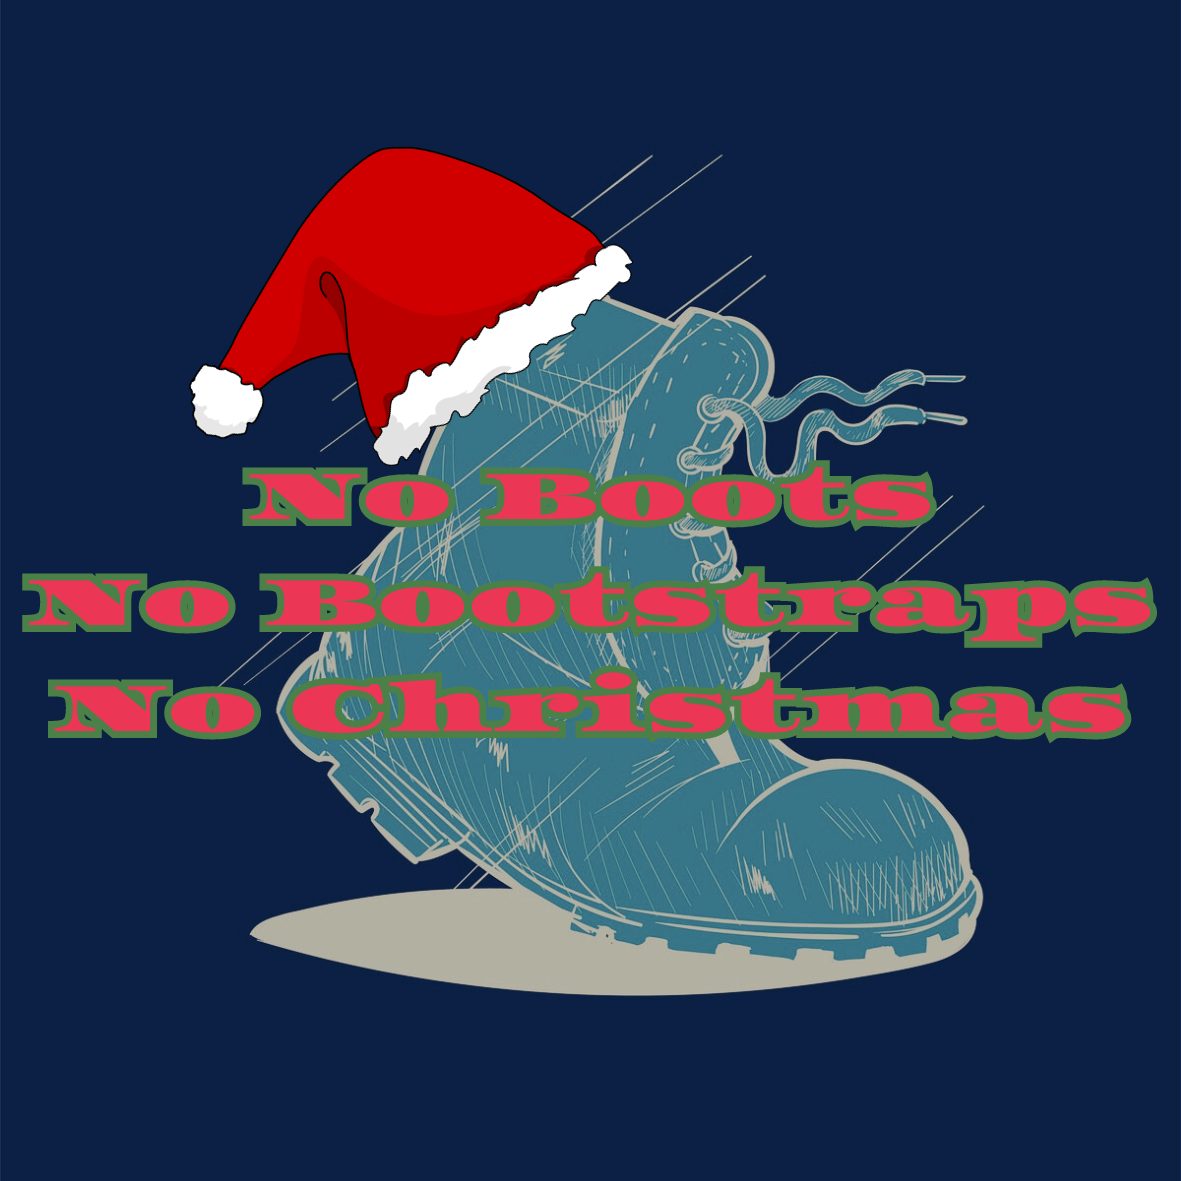 Pic of a work boot with a red santa hat, and red/green text saying,"No boots, no bootstraps, no Christmas."